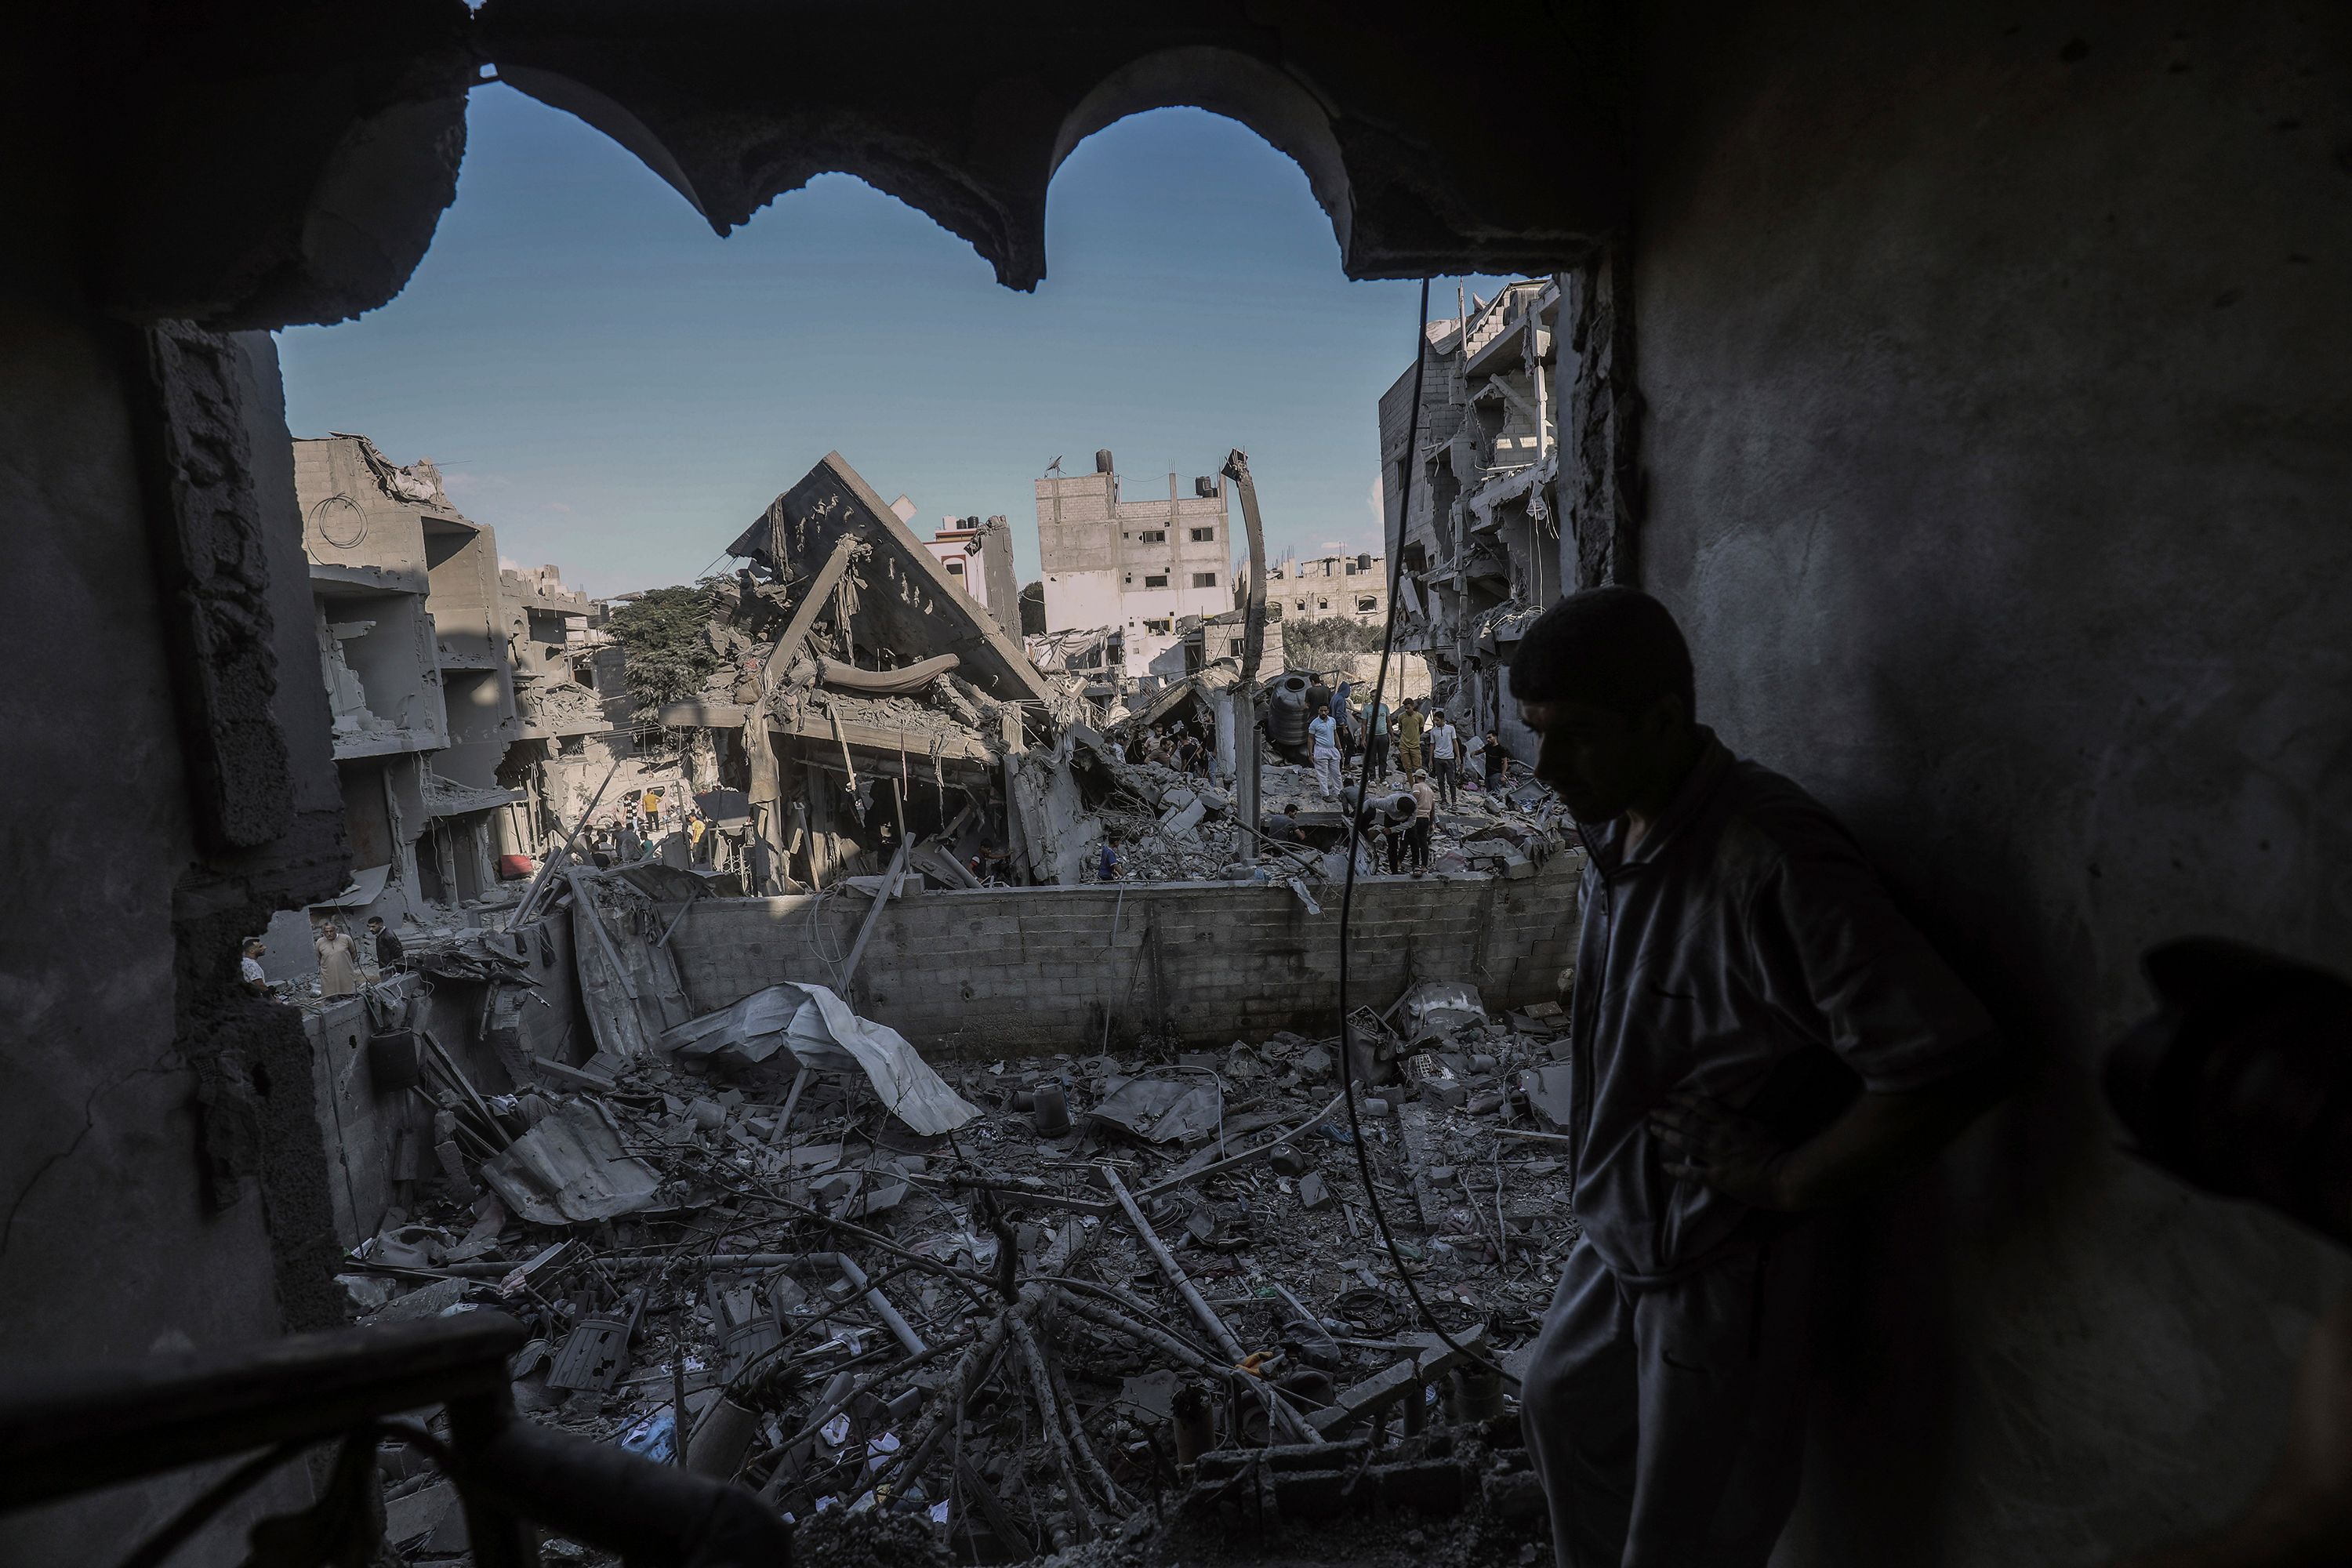 A Palestinian man inspects a destroyed house belonging to the Al-Jazzar family after an airstrike in Rafah, Gaza, on October 18.